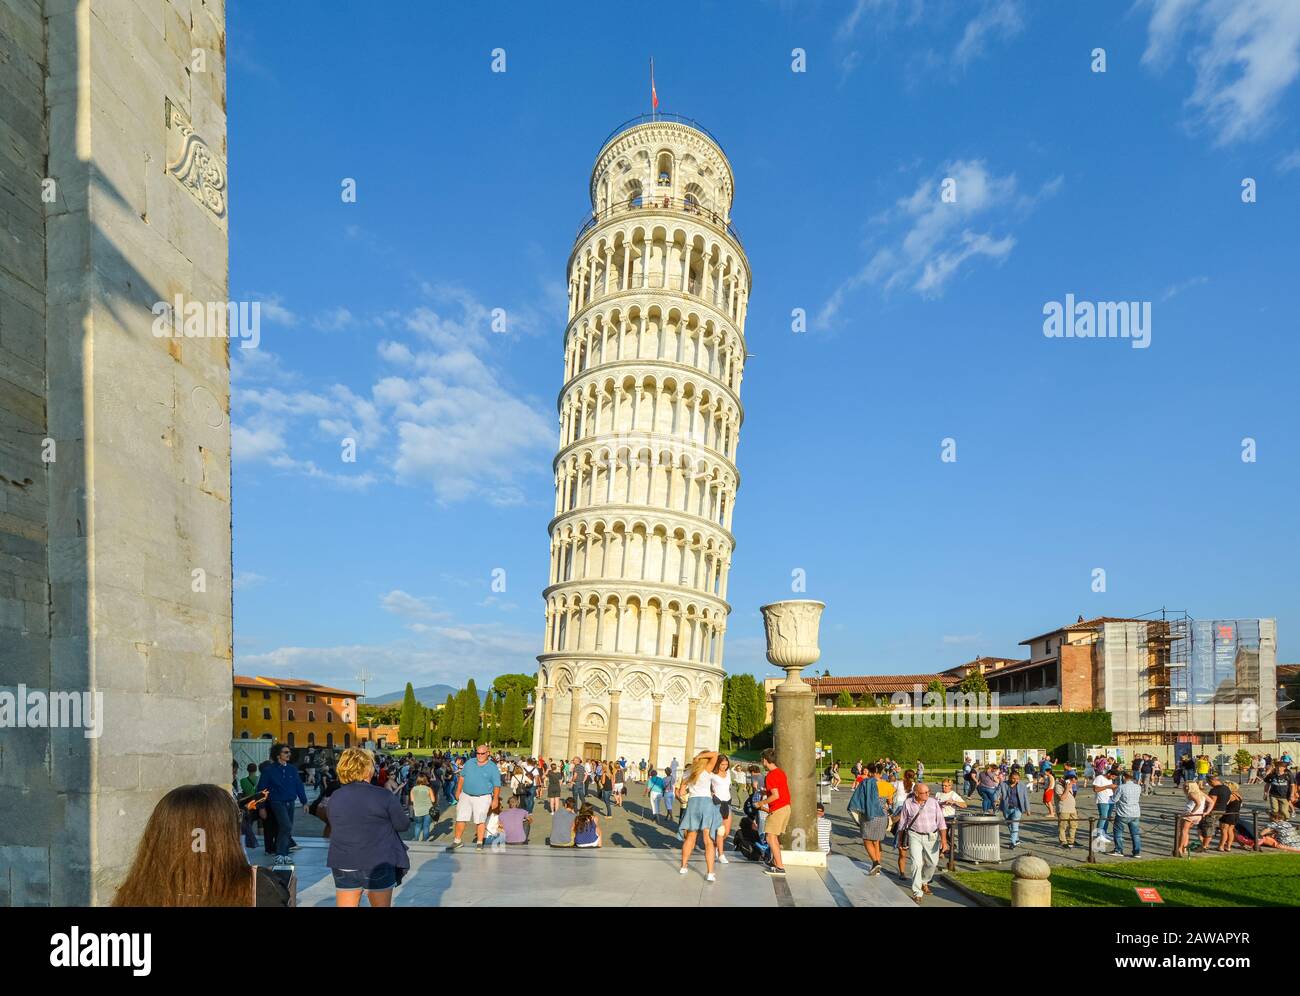 Tourists crowd the busy Piazza dei Miracoli as they view the Leaning Tower in Pisa, Italy. Stock Photo